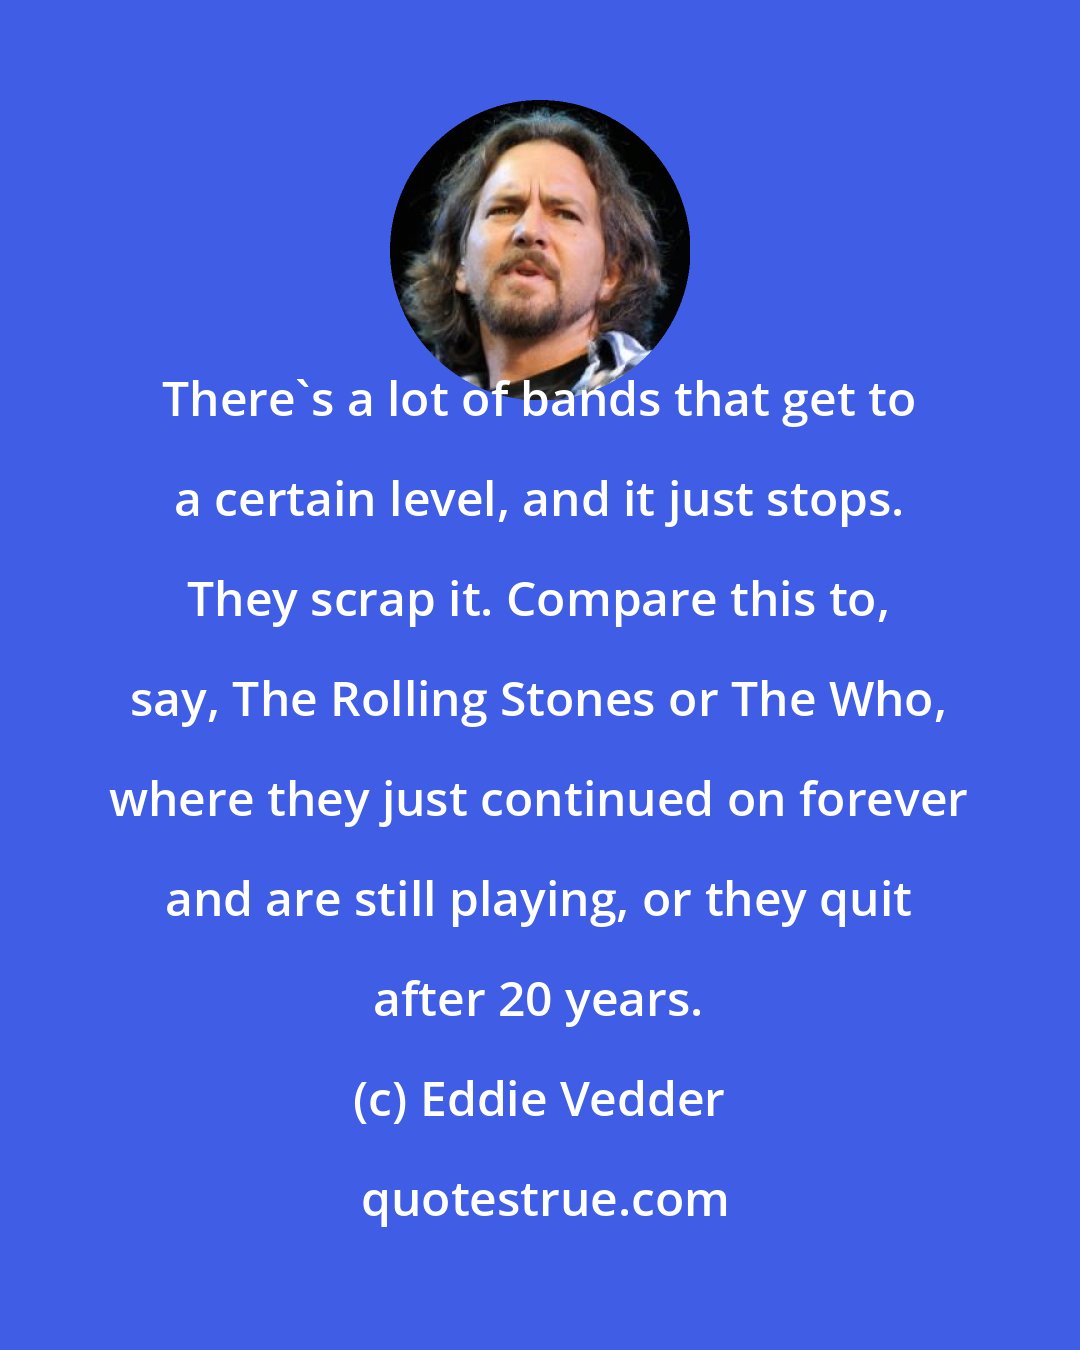 Eddie Vedder: There's a lot of bands that get to a certain level, and it just stops. They scrap it. Compare this to, say, The Rolling Stones or The Who, where they just continued on forever and are still playing, or they quit after 20 years.